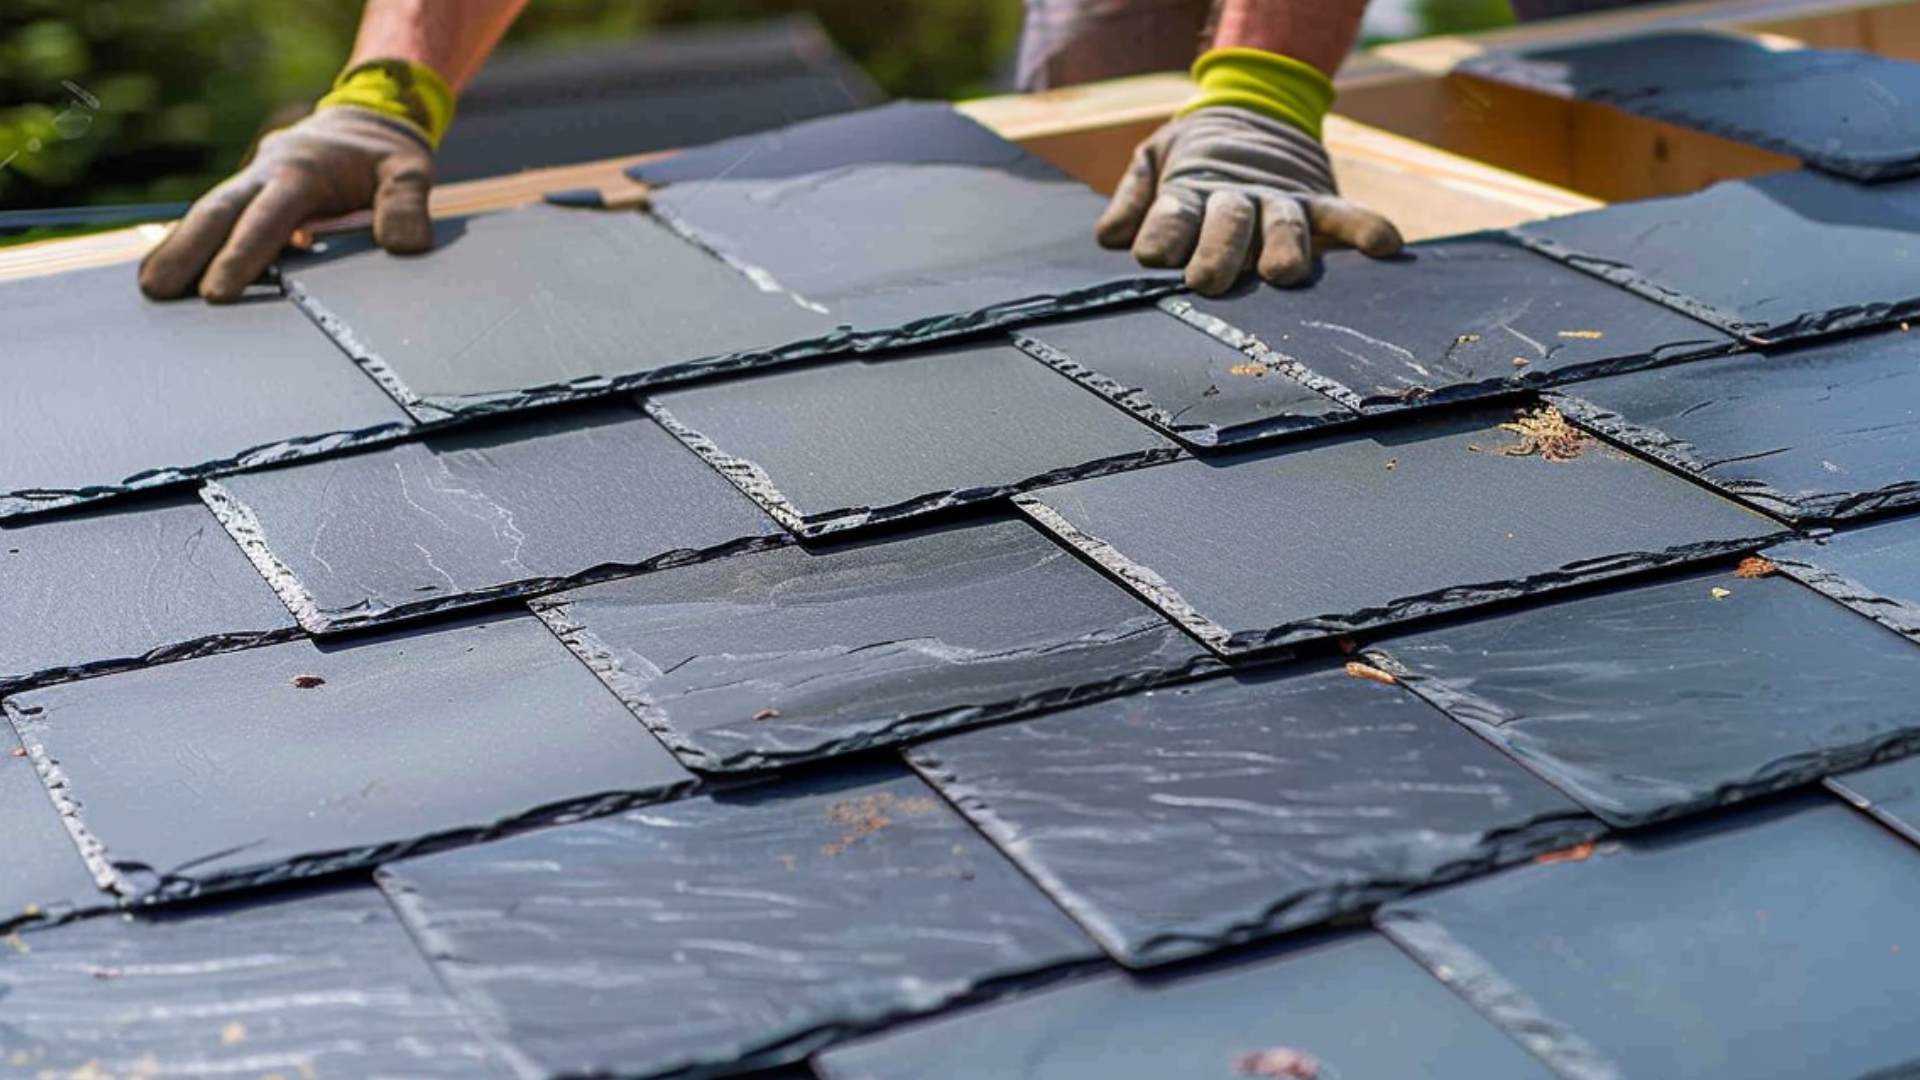 create an image of a roofing constructor that is fixing a slate roof of a house.